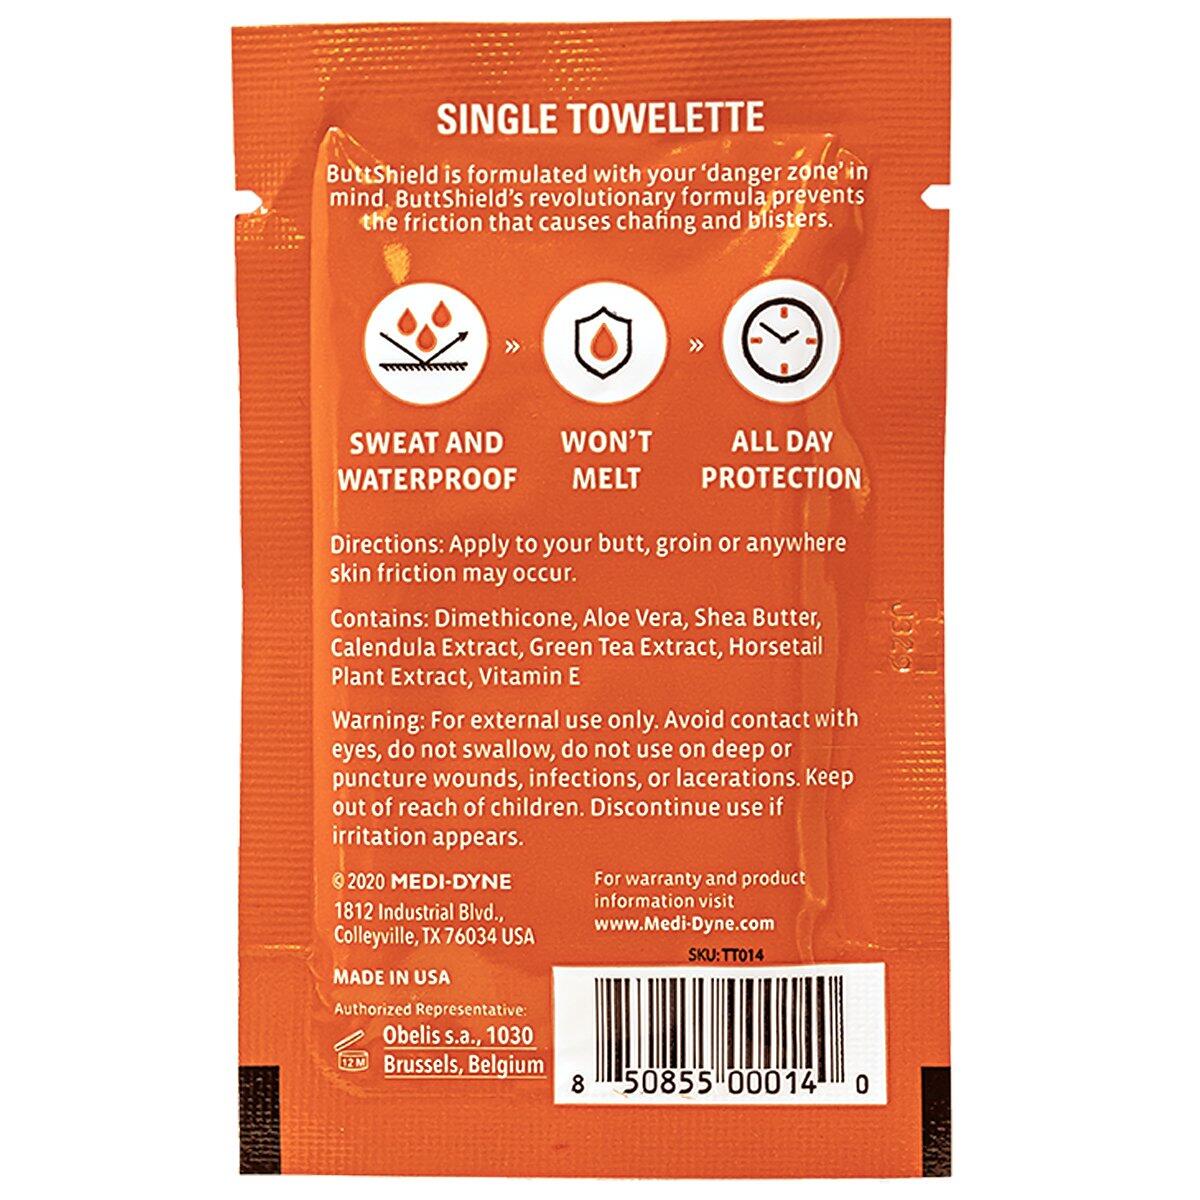 Buttshield Towelette 6 Pack 3/5